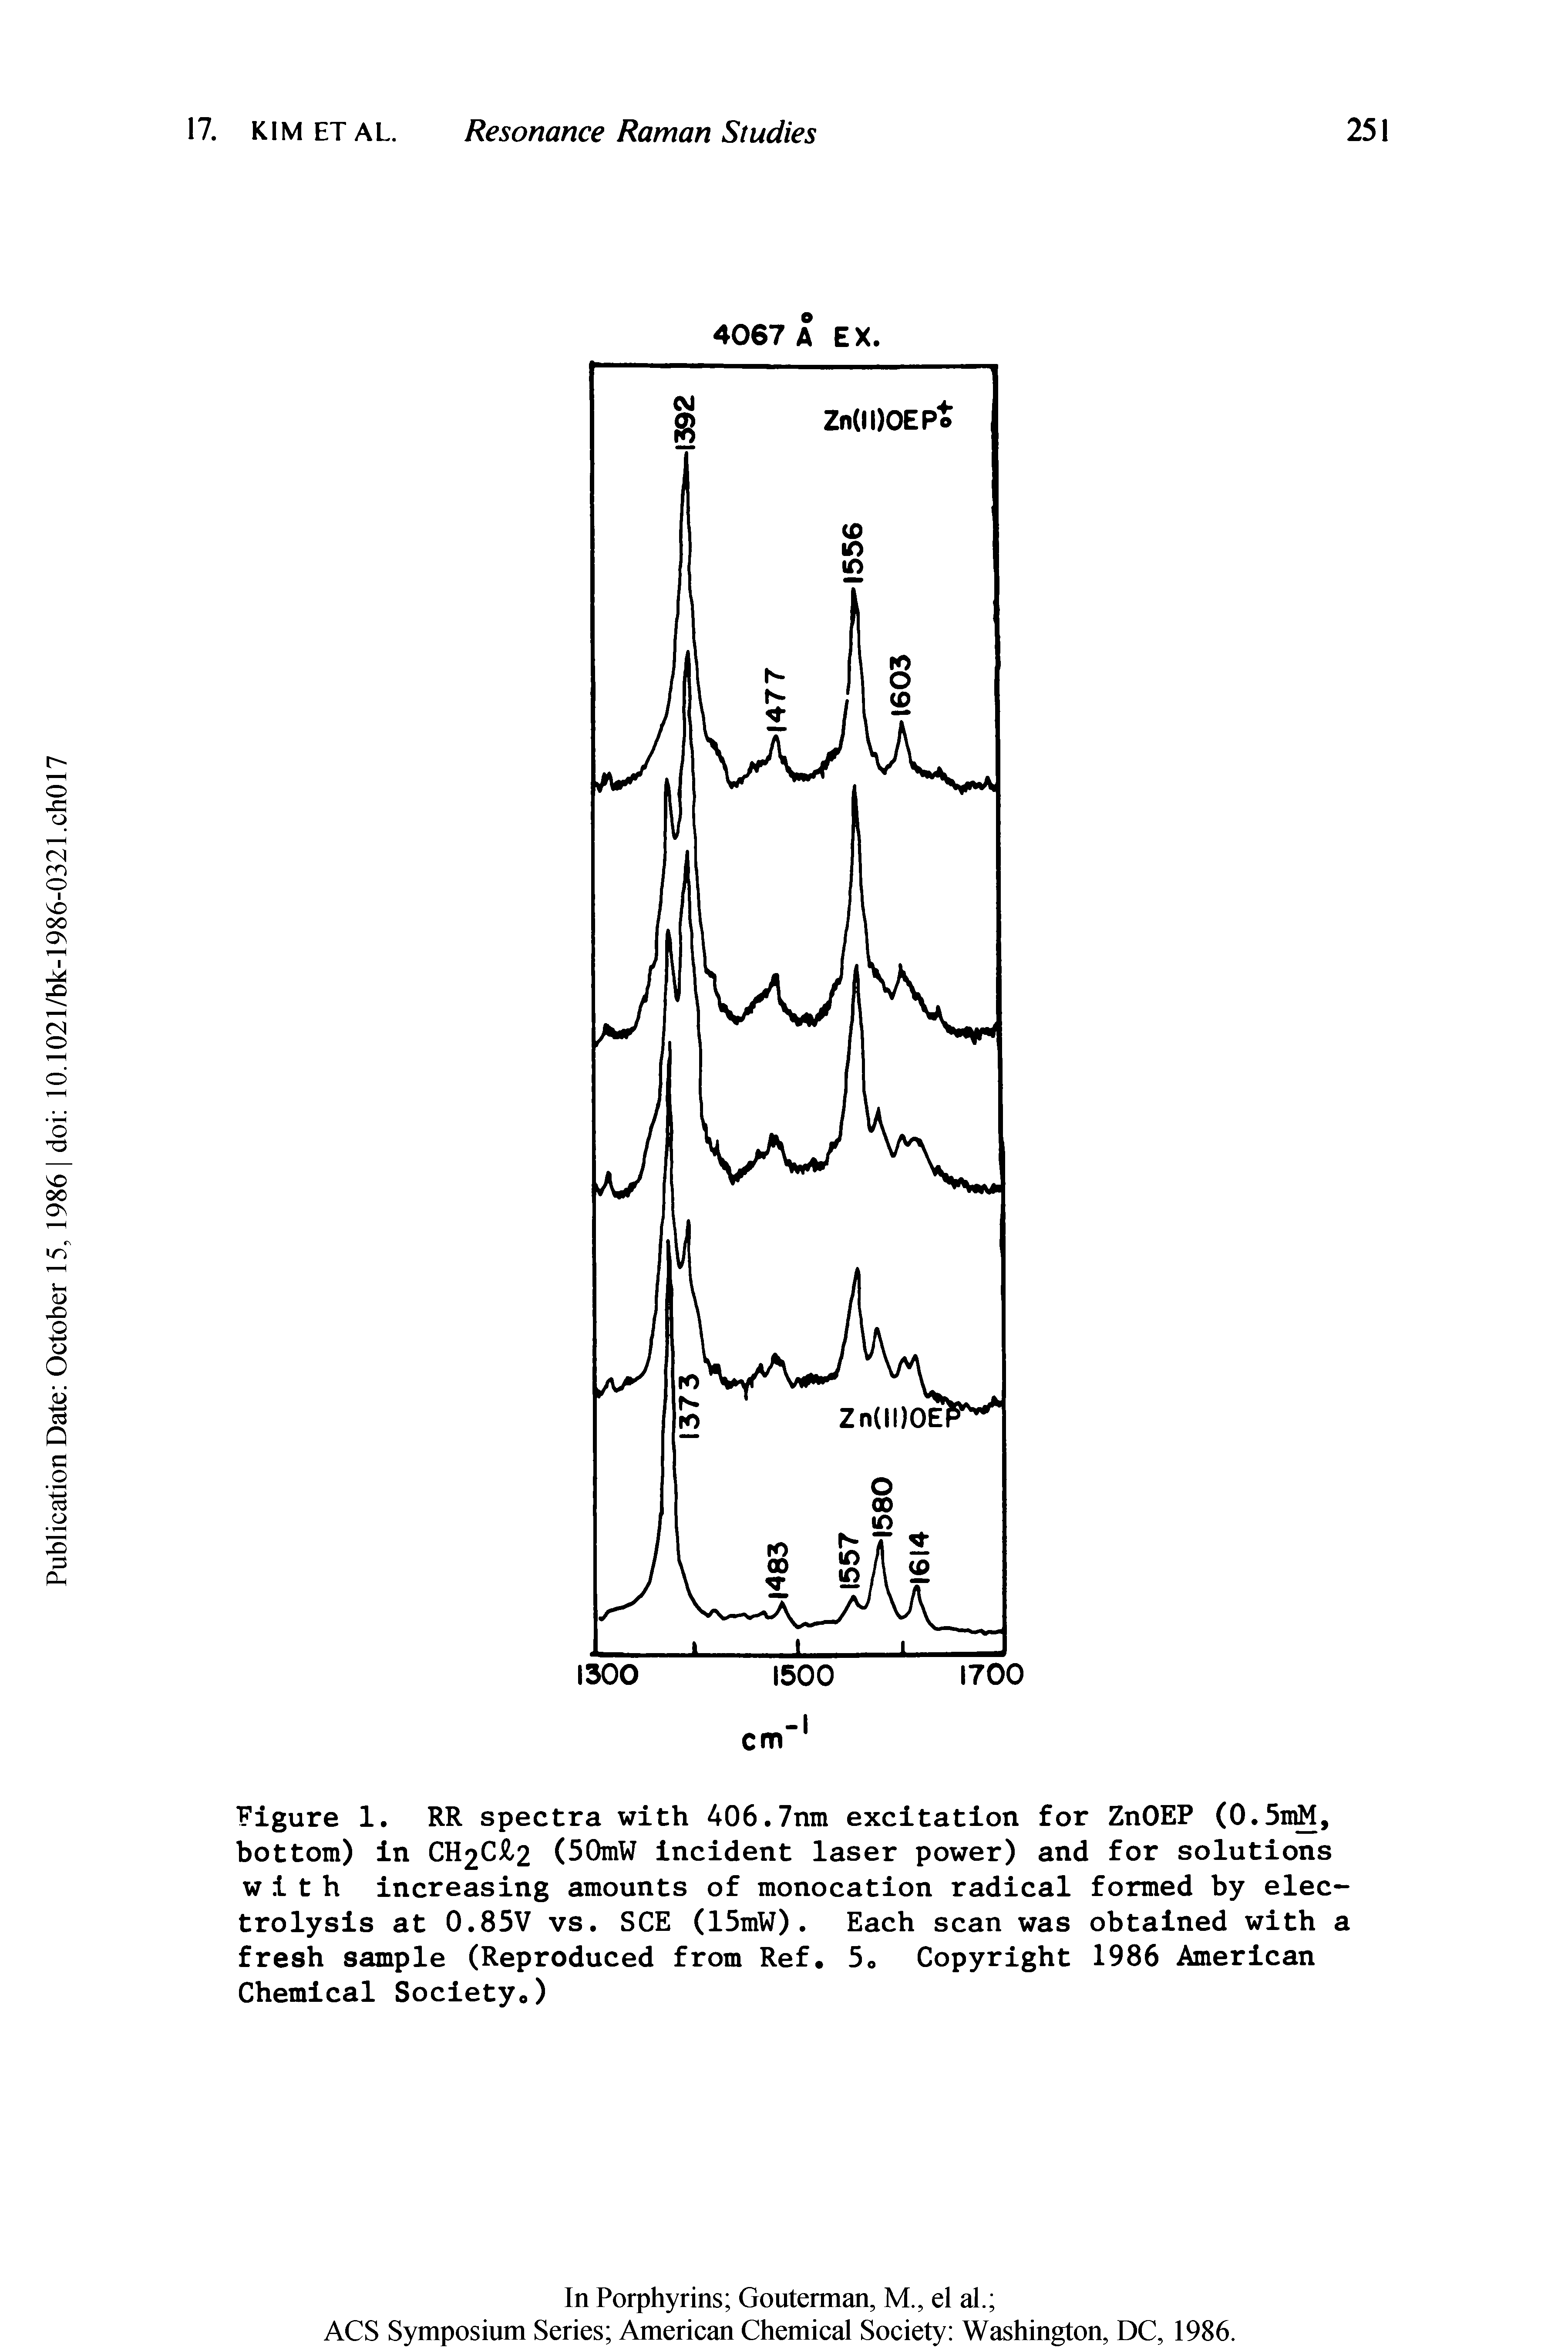 Figure 1. RR spectra with 406.7nm excitation for ZnOEP (0.5ii, bottom) in CH2Cil2 (50mW incident laser power) and for solutions with increasing amounts of monocation radical formed by electrolysis at 0.85V vs. SCE (15mW). Each scan was obtained with a fresh sample (Reproduced from Ref. 5. Copyright 1986 American Chemical Society.)...